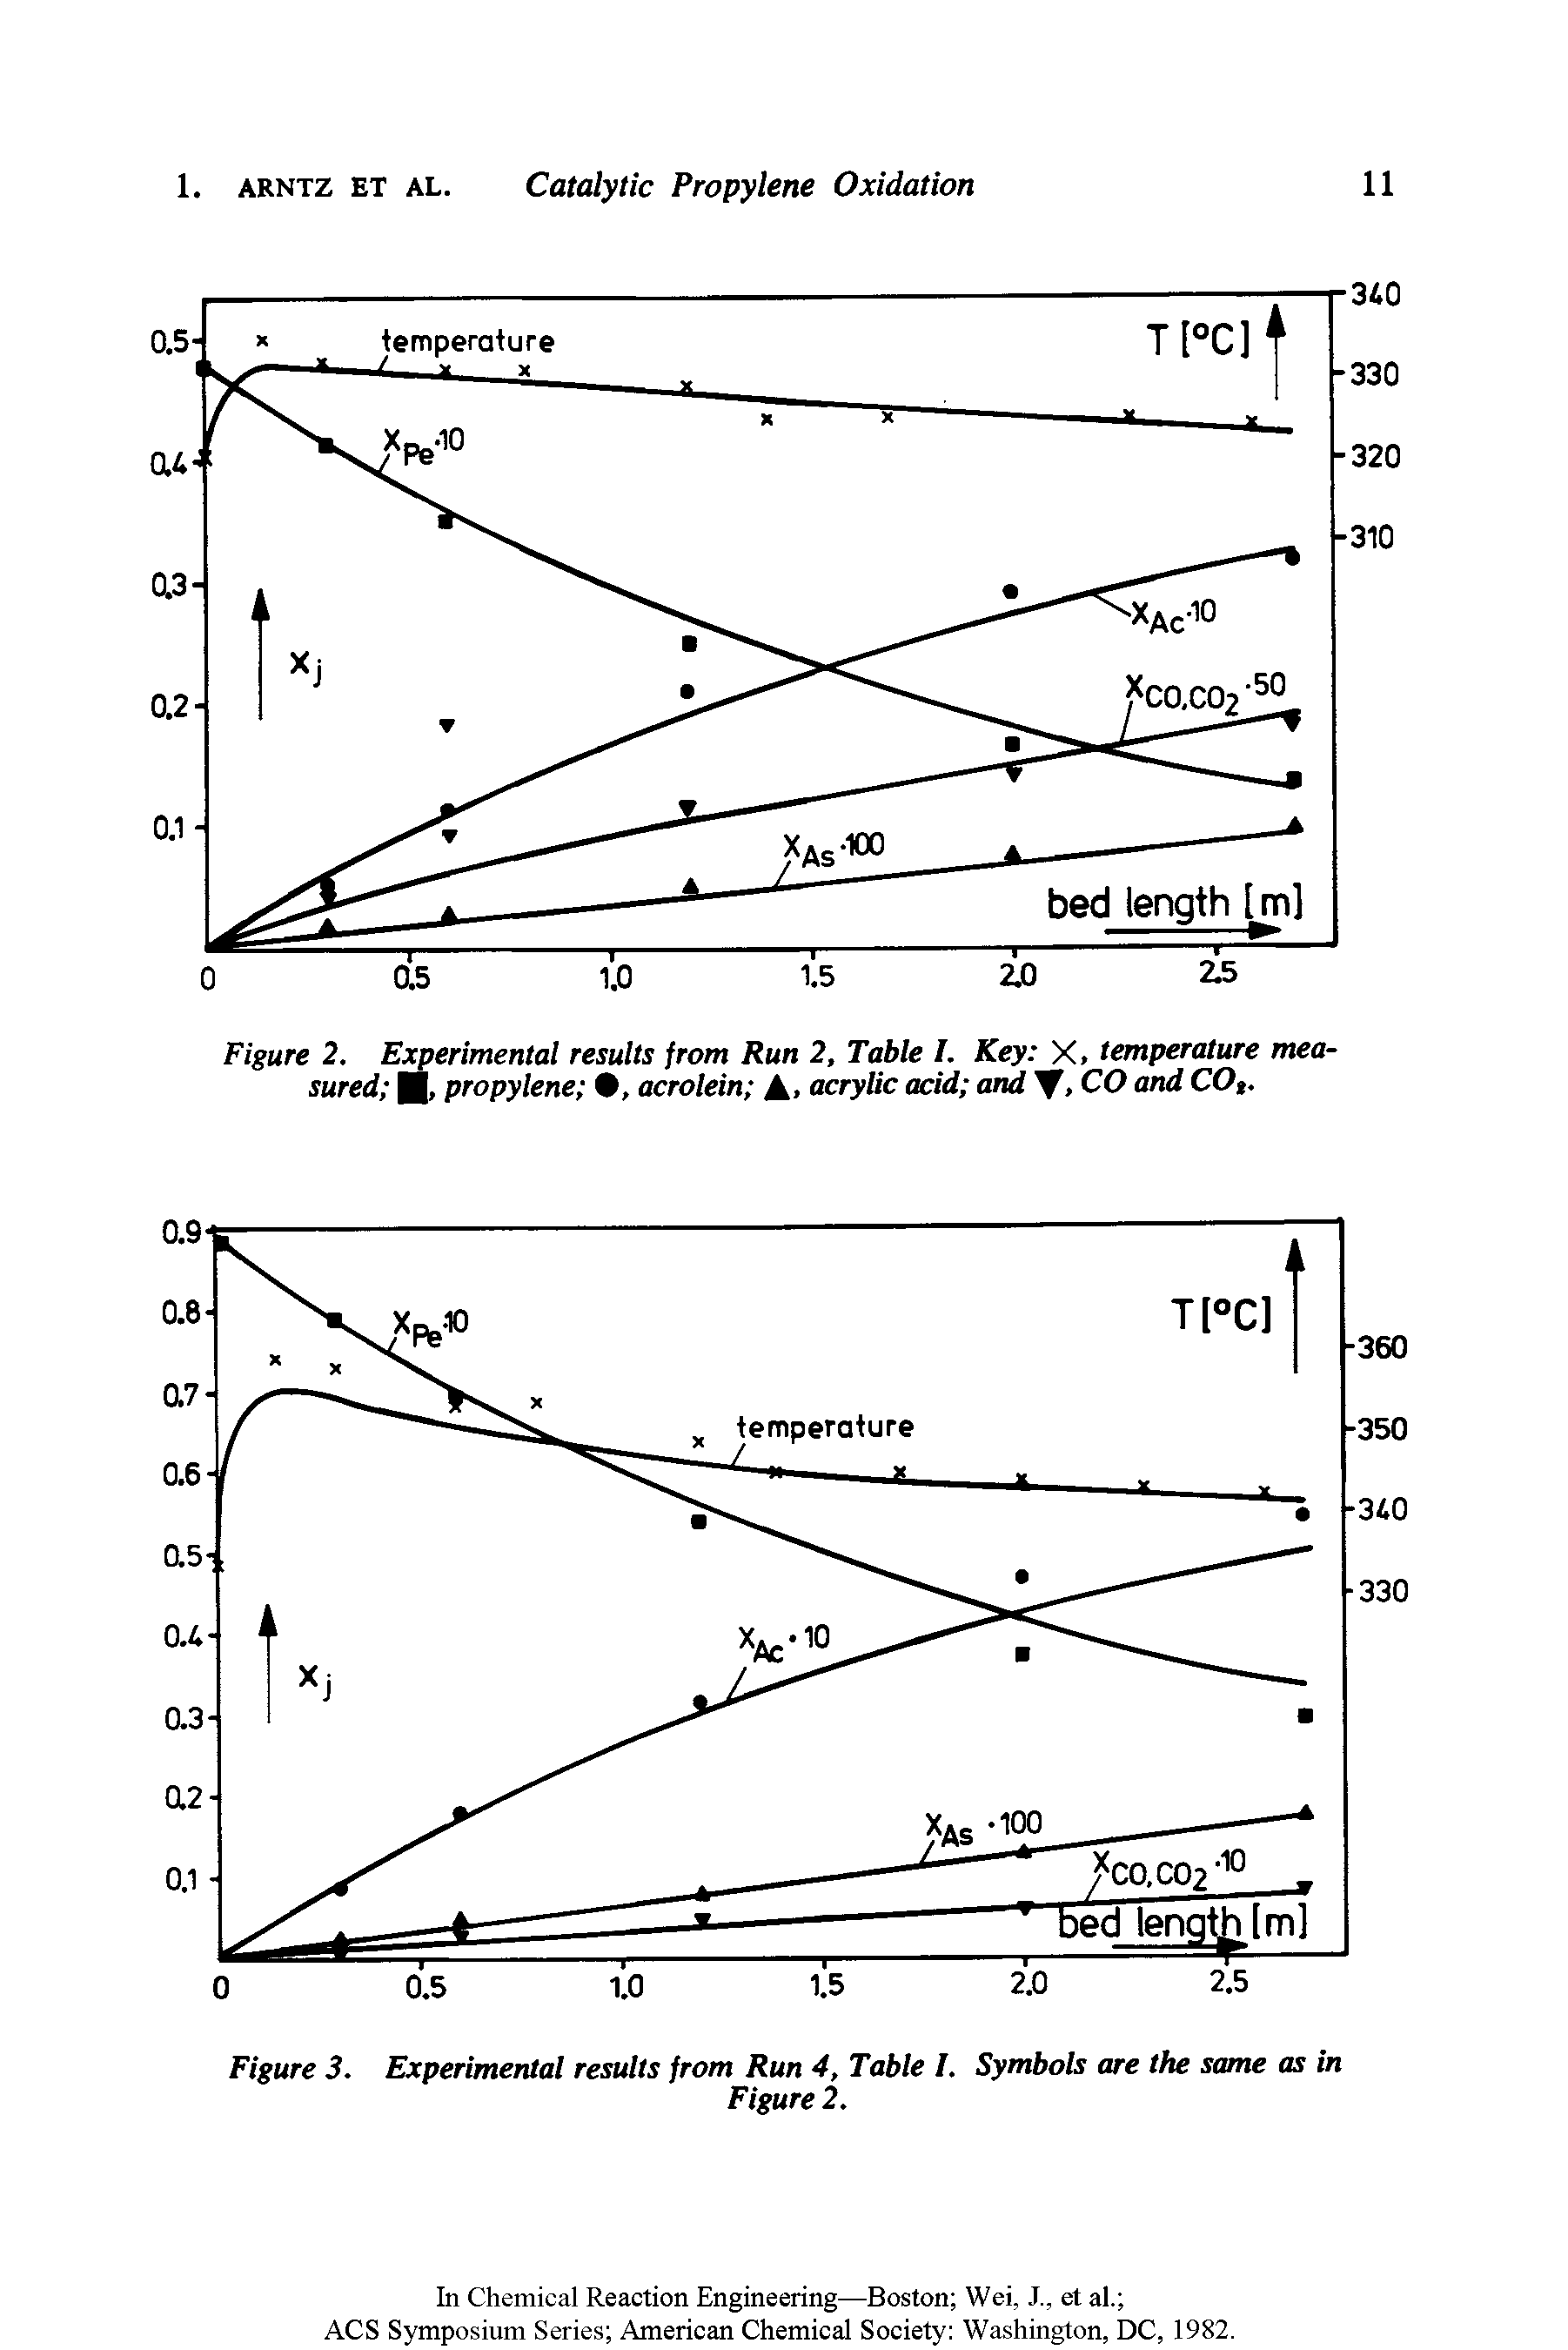 Figure 2. Experimental results from Run 2, Table I. Key X, temperature measured propylene , acrolein A> acrylic acid and CO and CO,.